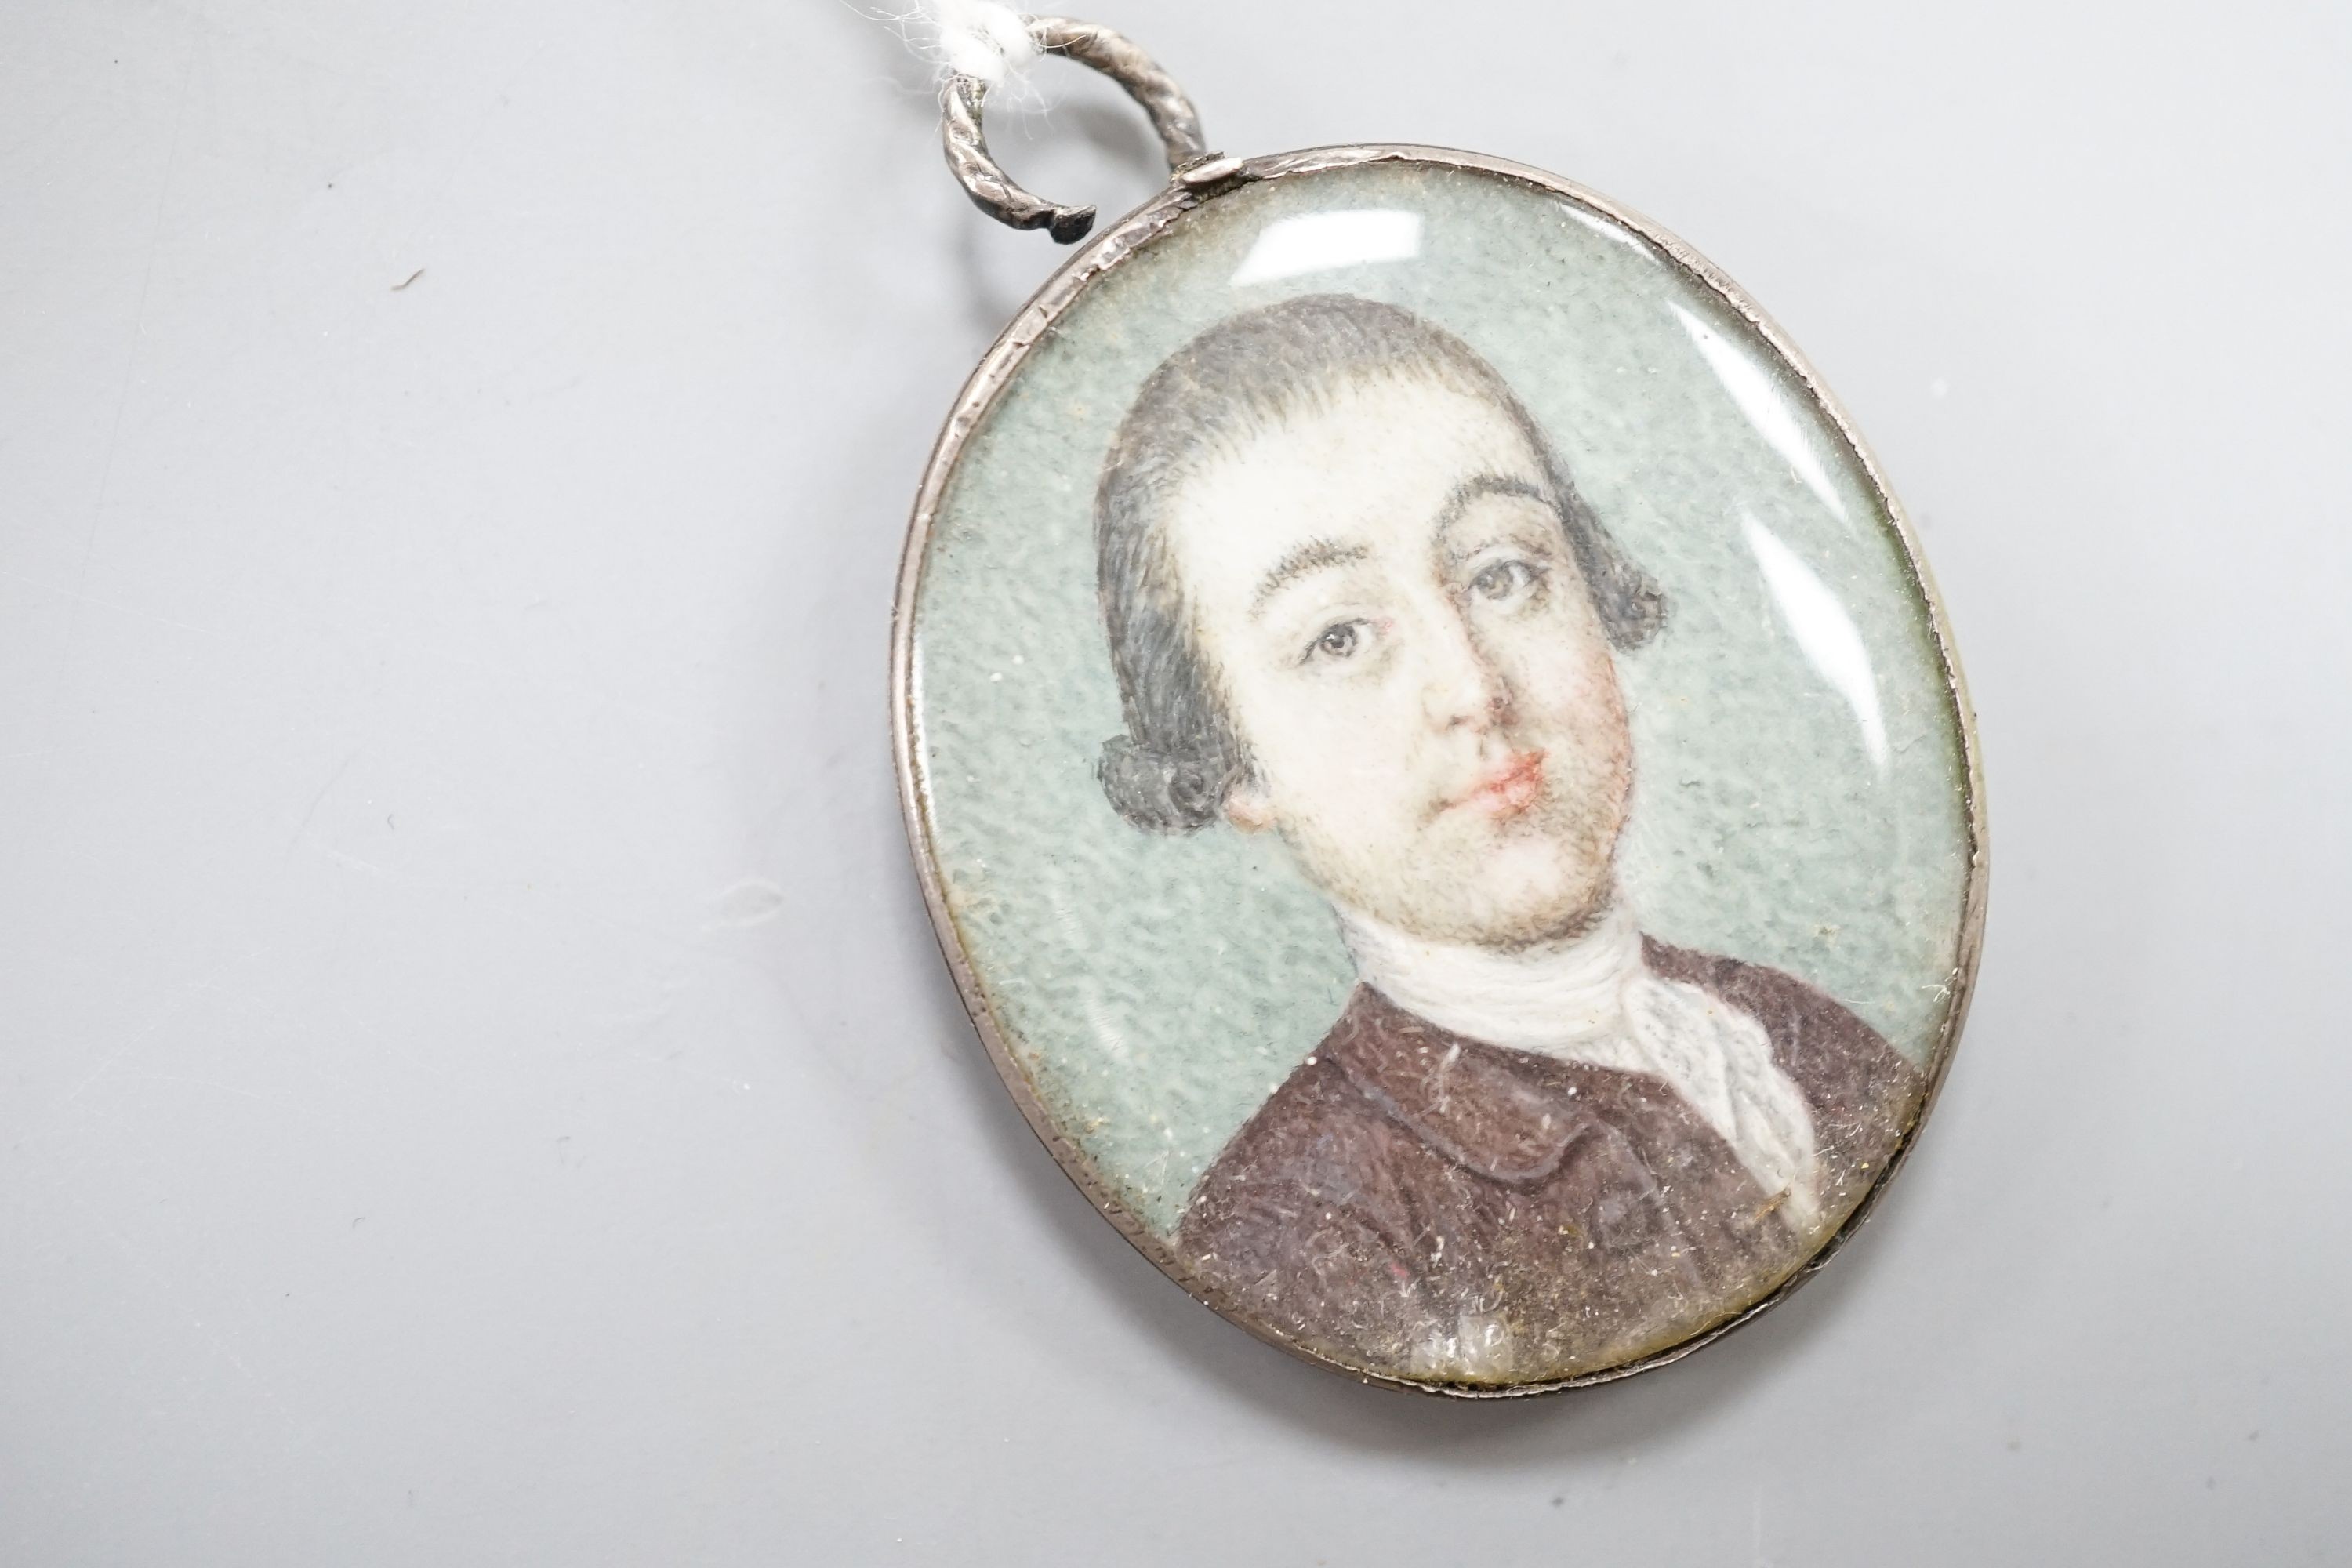 Late 18th century English School, oil on ivory, Miniature portrait of a gentleman in a brown coat 3.5x3cm